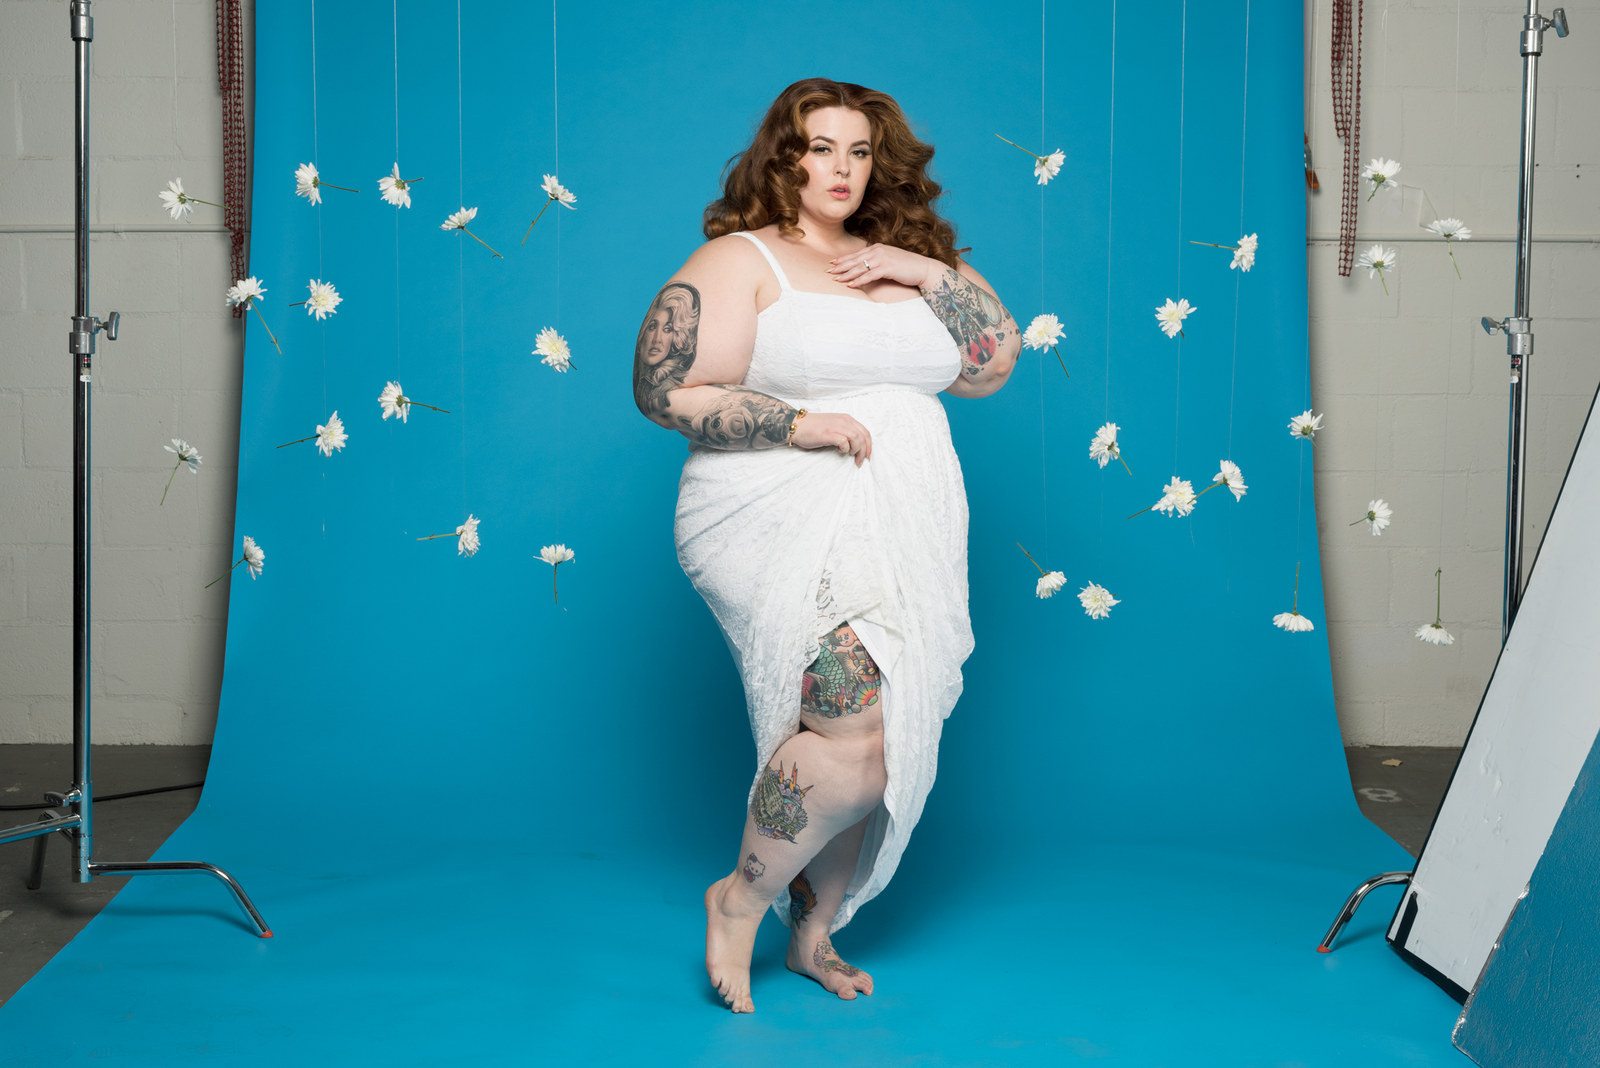 Tess Holliday was raped bullied for being trailer trash and her mum was  shot in the head  now Piers Morgan is after her  The Sun